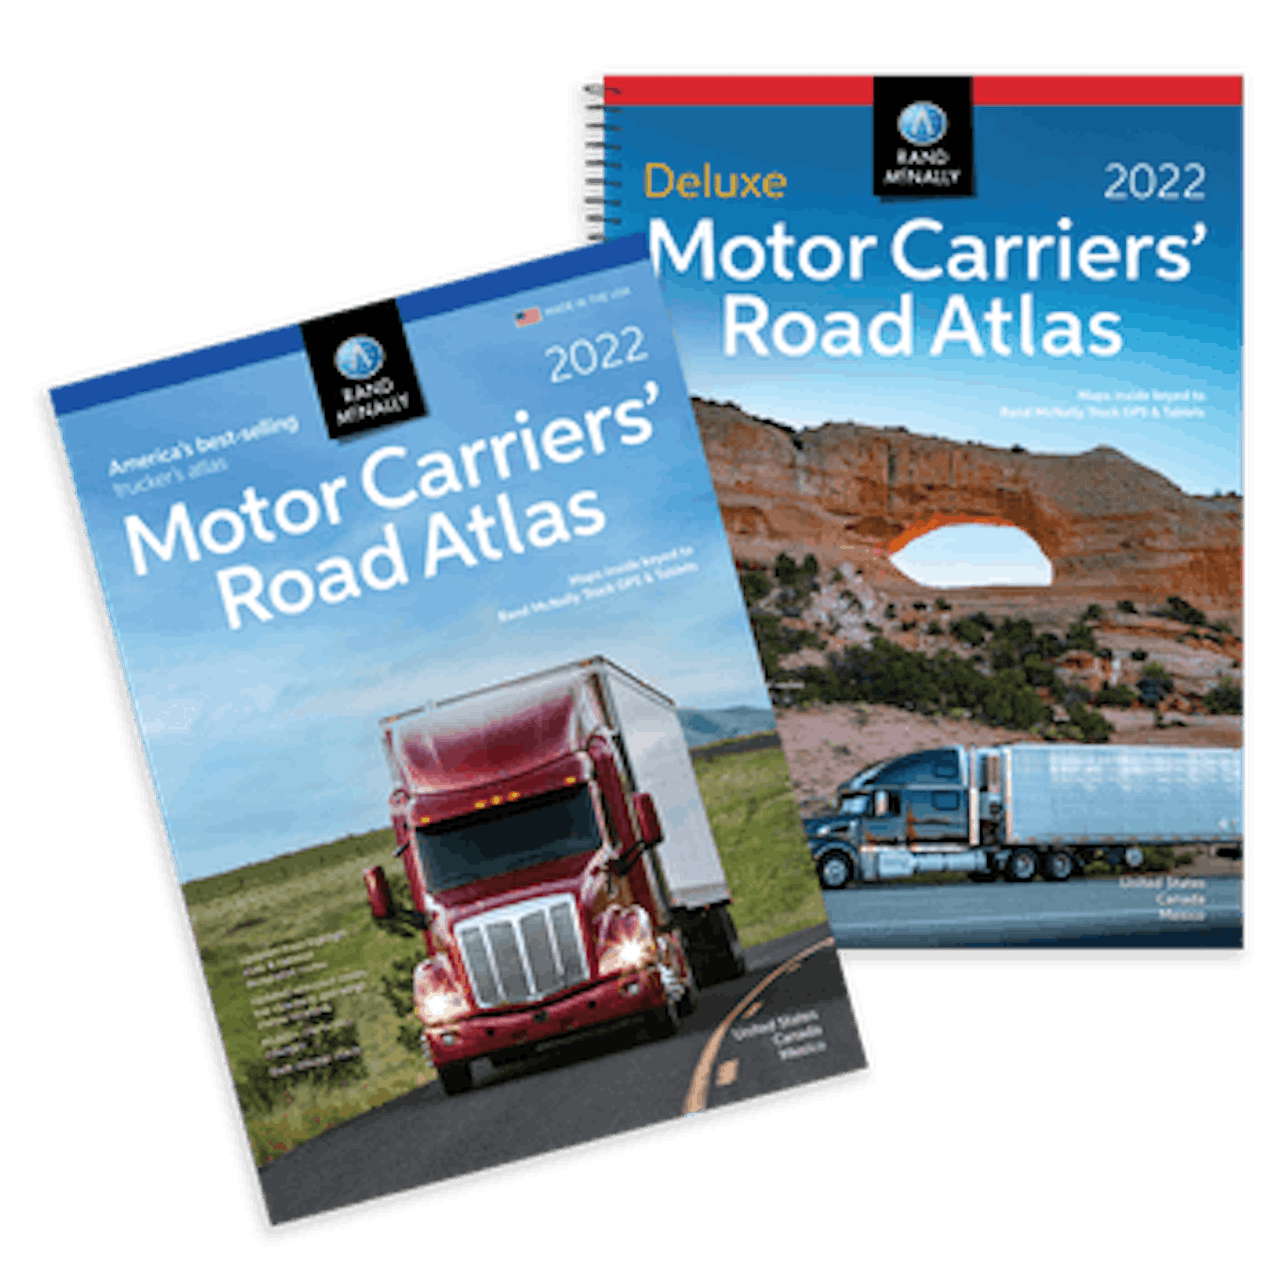 New Edition Motor Carriers Road Atlas Available 60ddc119b9f0f